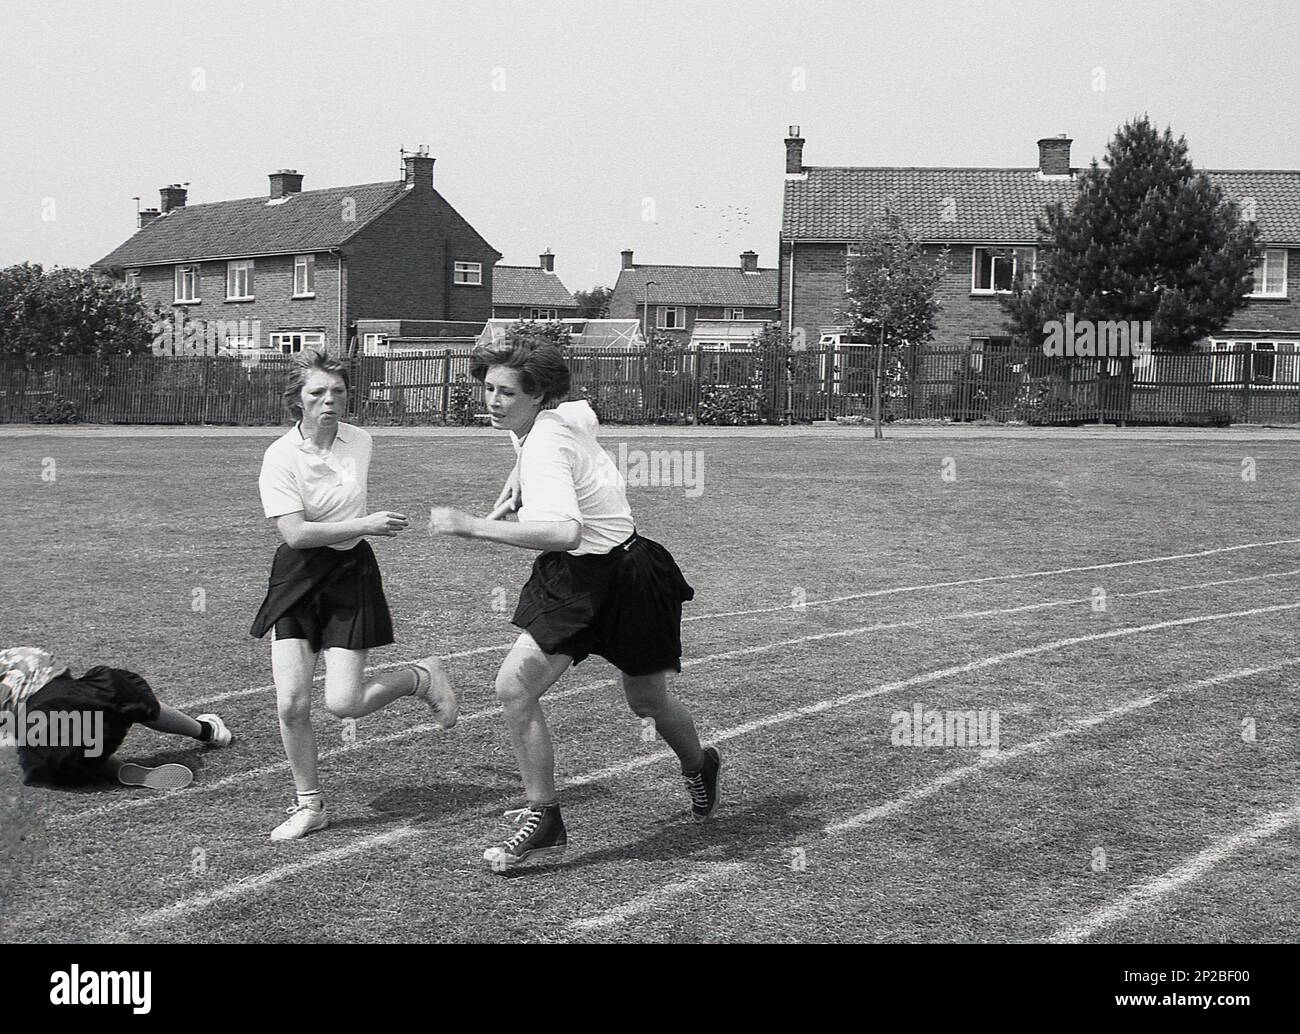 1989, at secondary school sports day, outside on a grass track, senior girls taking part in a relay race, one has fallen, England, UK Stock Photo